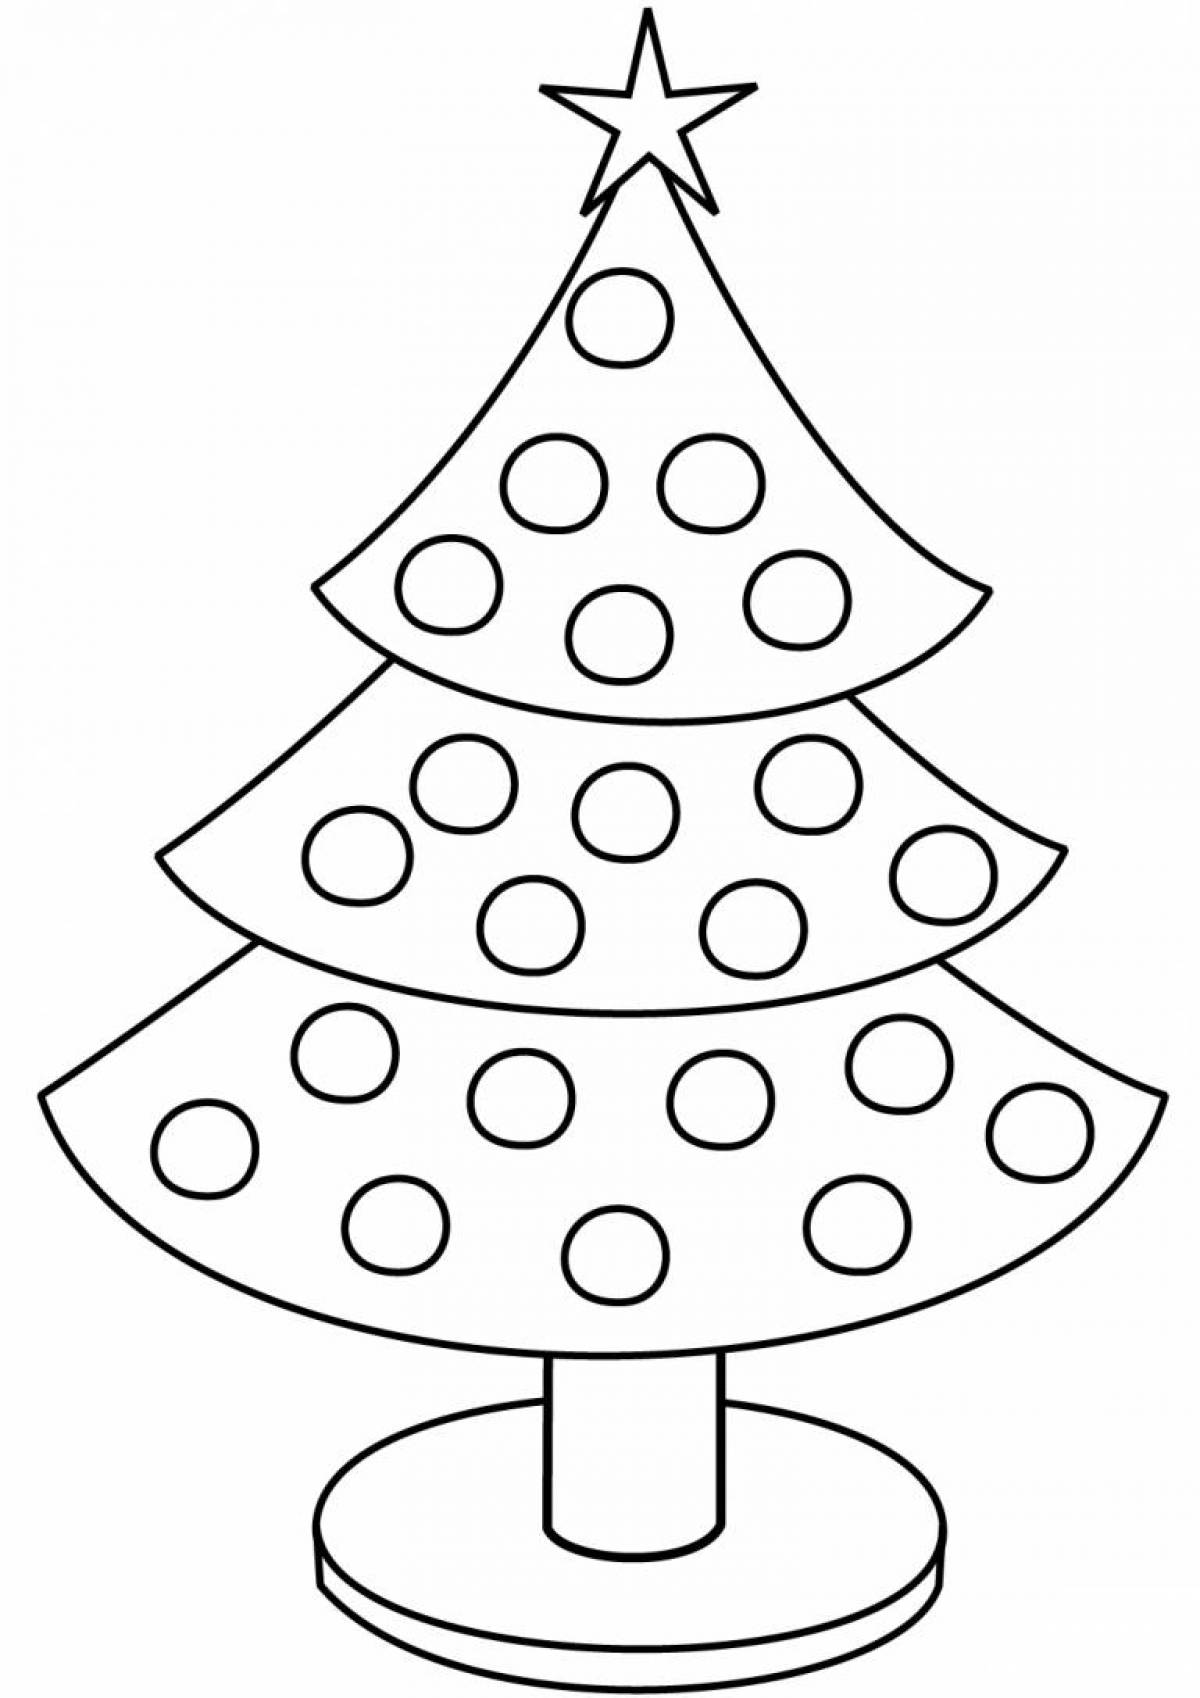 Christmas tree coloring pages with taste for children 3-4 years old